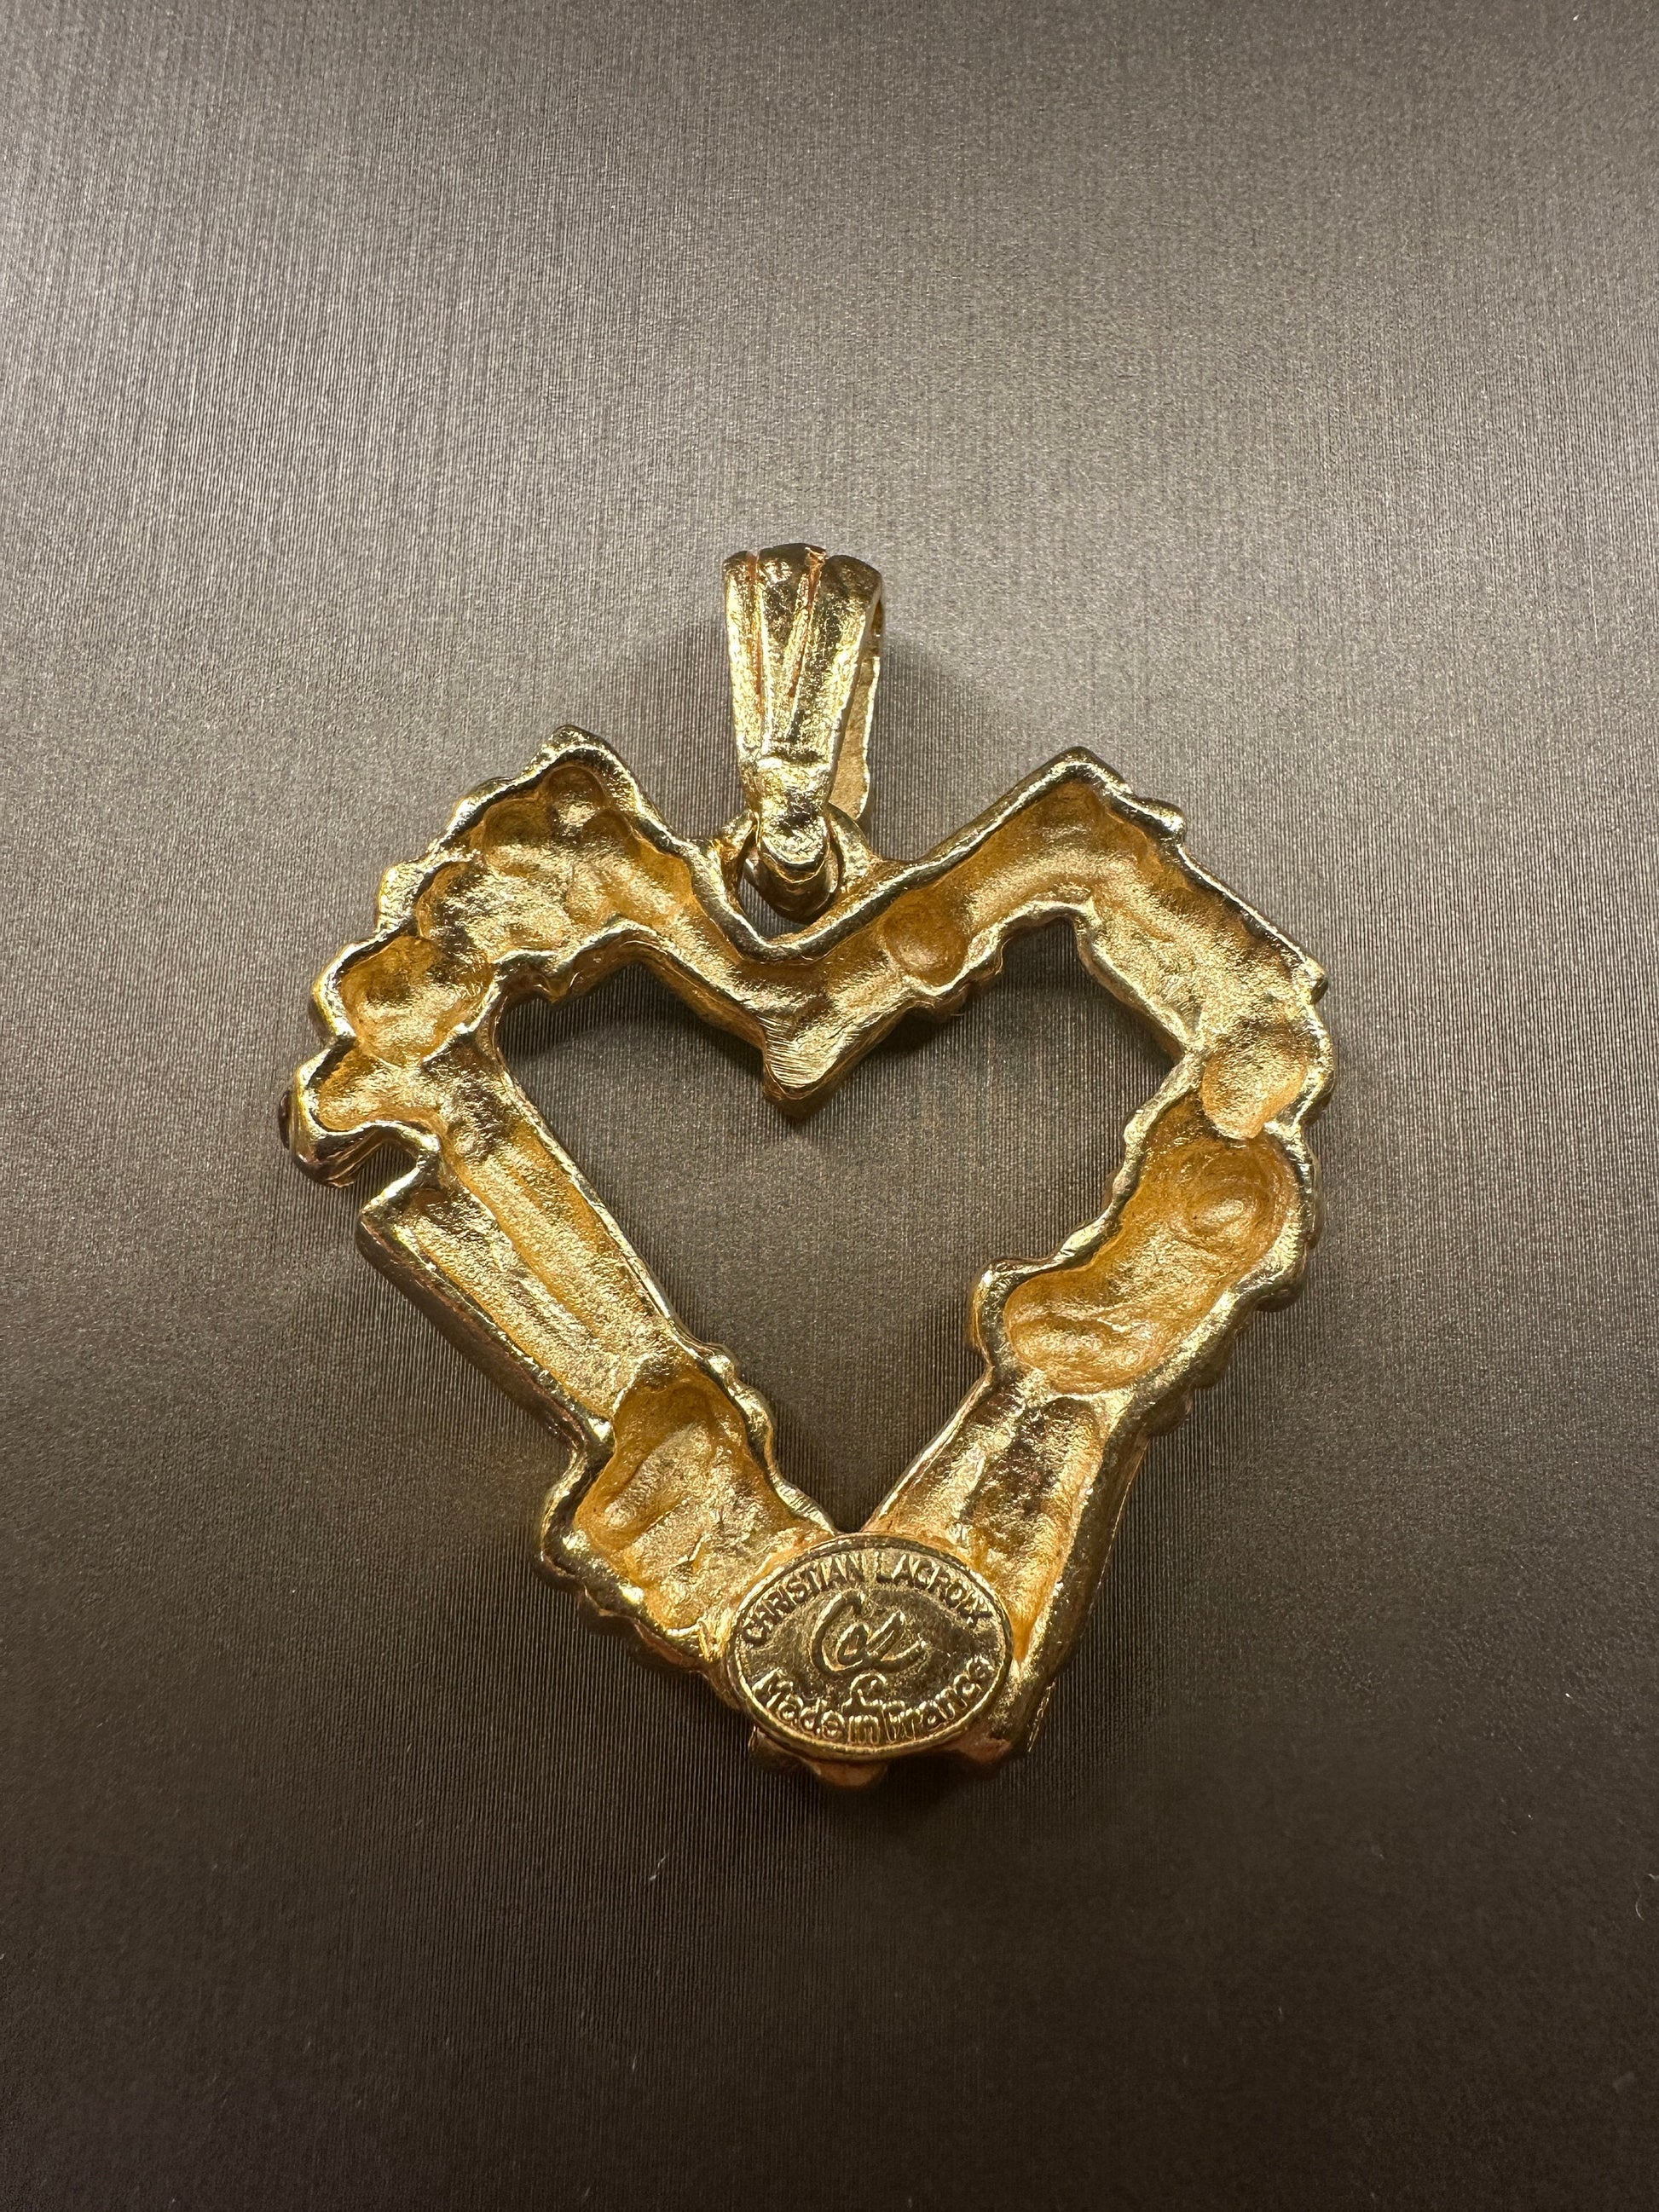 CHRISTIAN LACROIX VINTAGE, 100% Authentic Genuine, Textured Hollow Heart Charm, Gold, 1990s, Great Condition, Rare